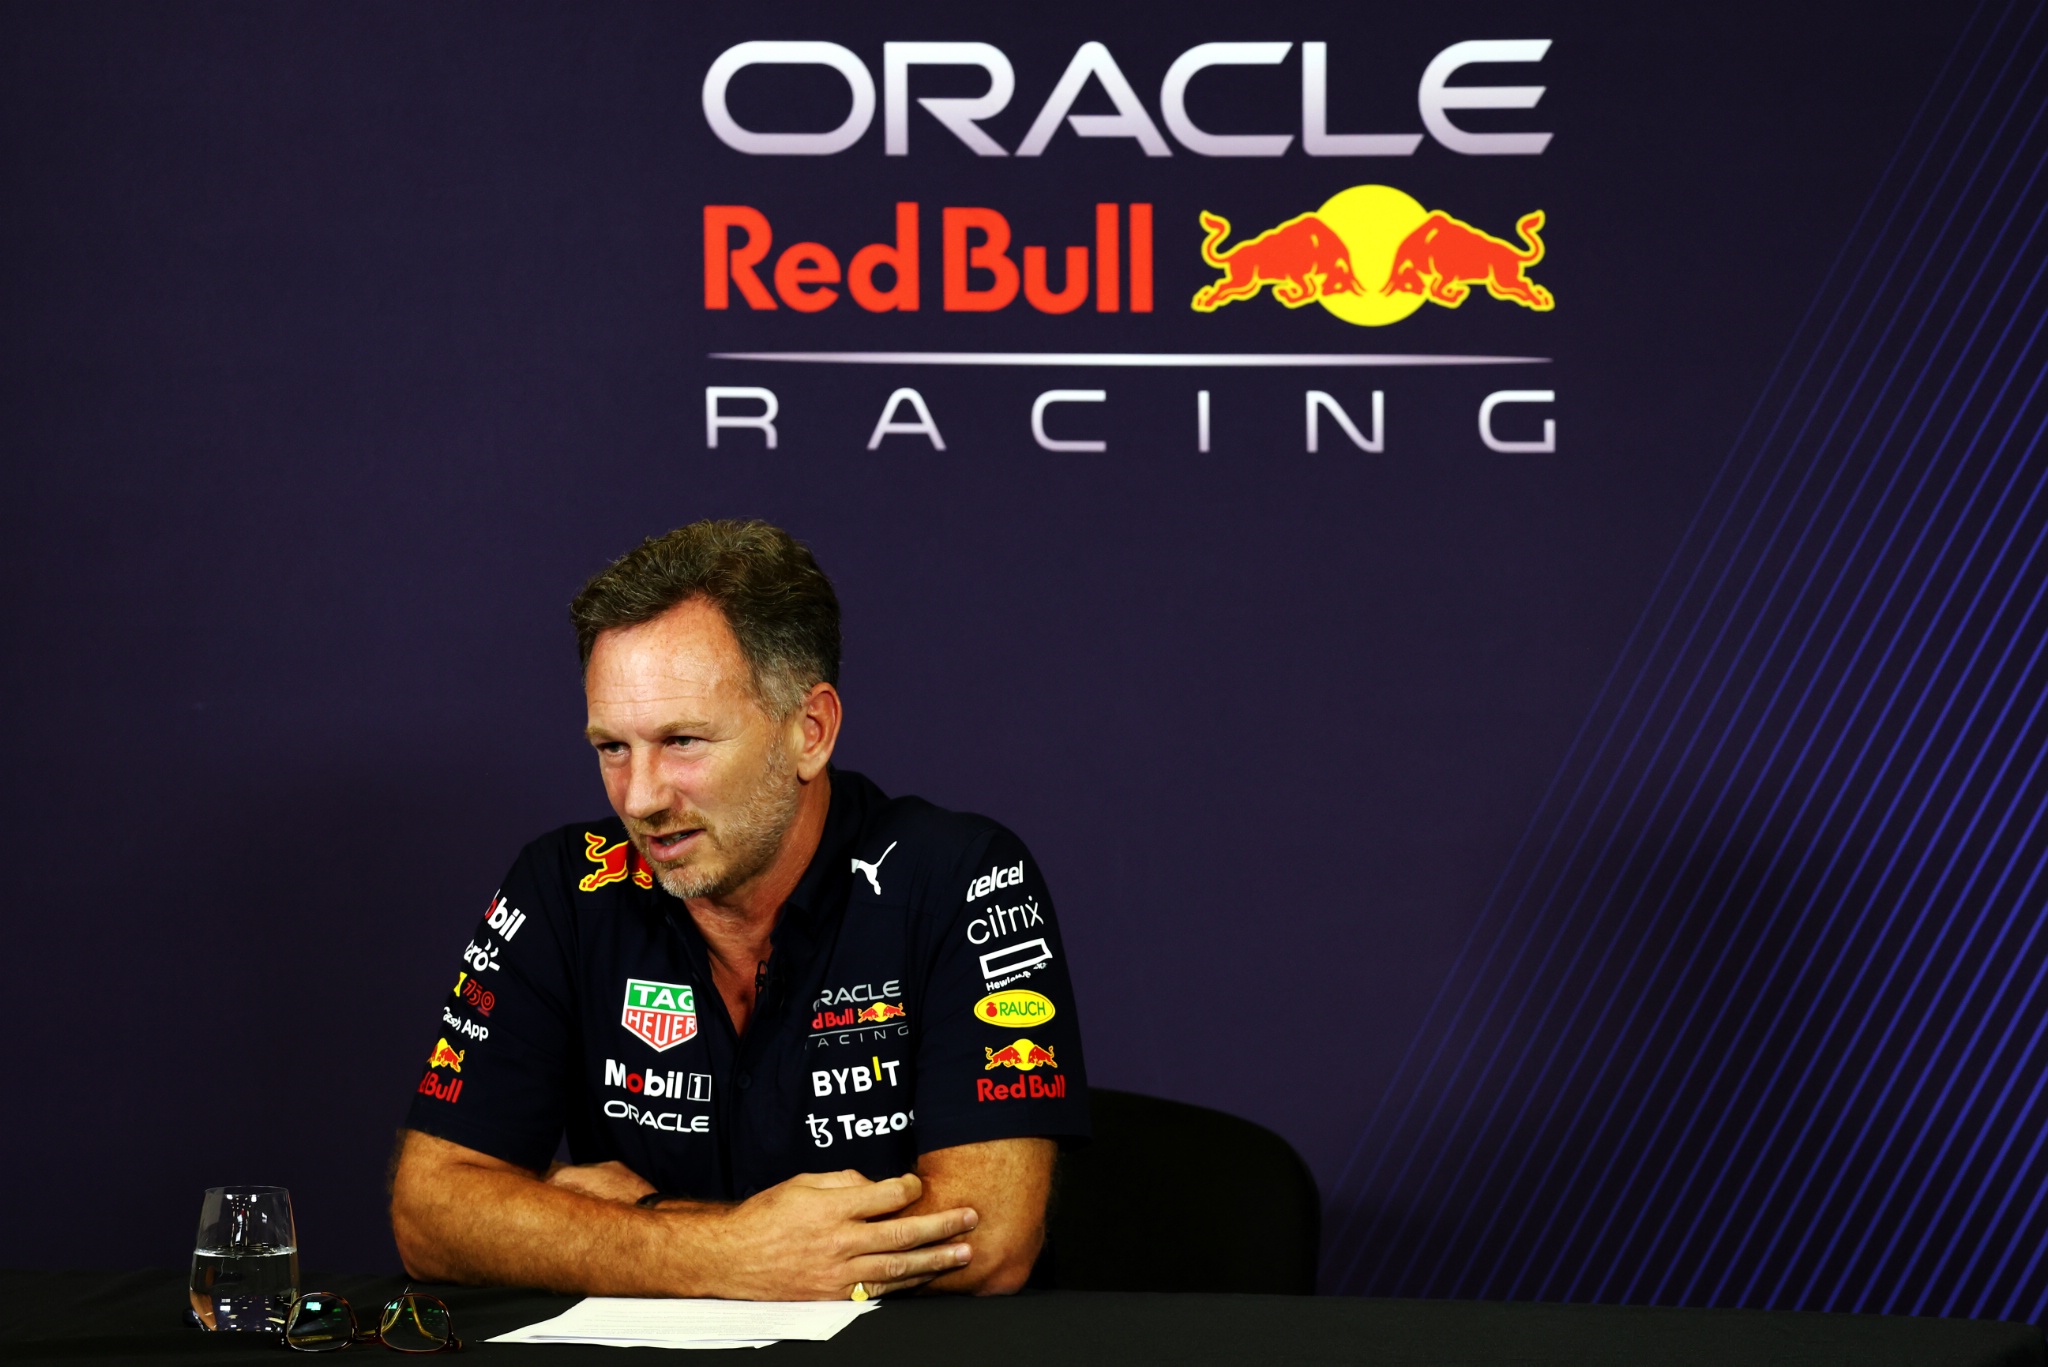 Christian Horner (GBR) Red Bull Racing Team Principal in a press conference regarding the outcome of the cost cap breach.